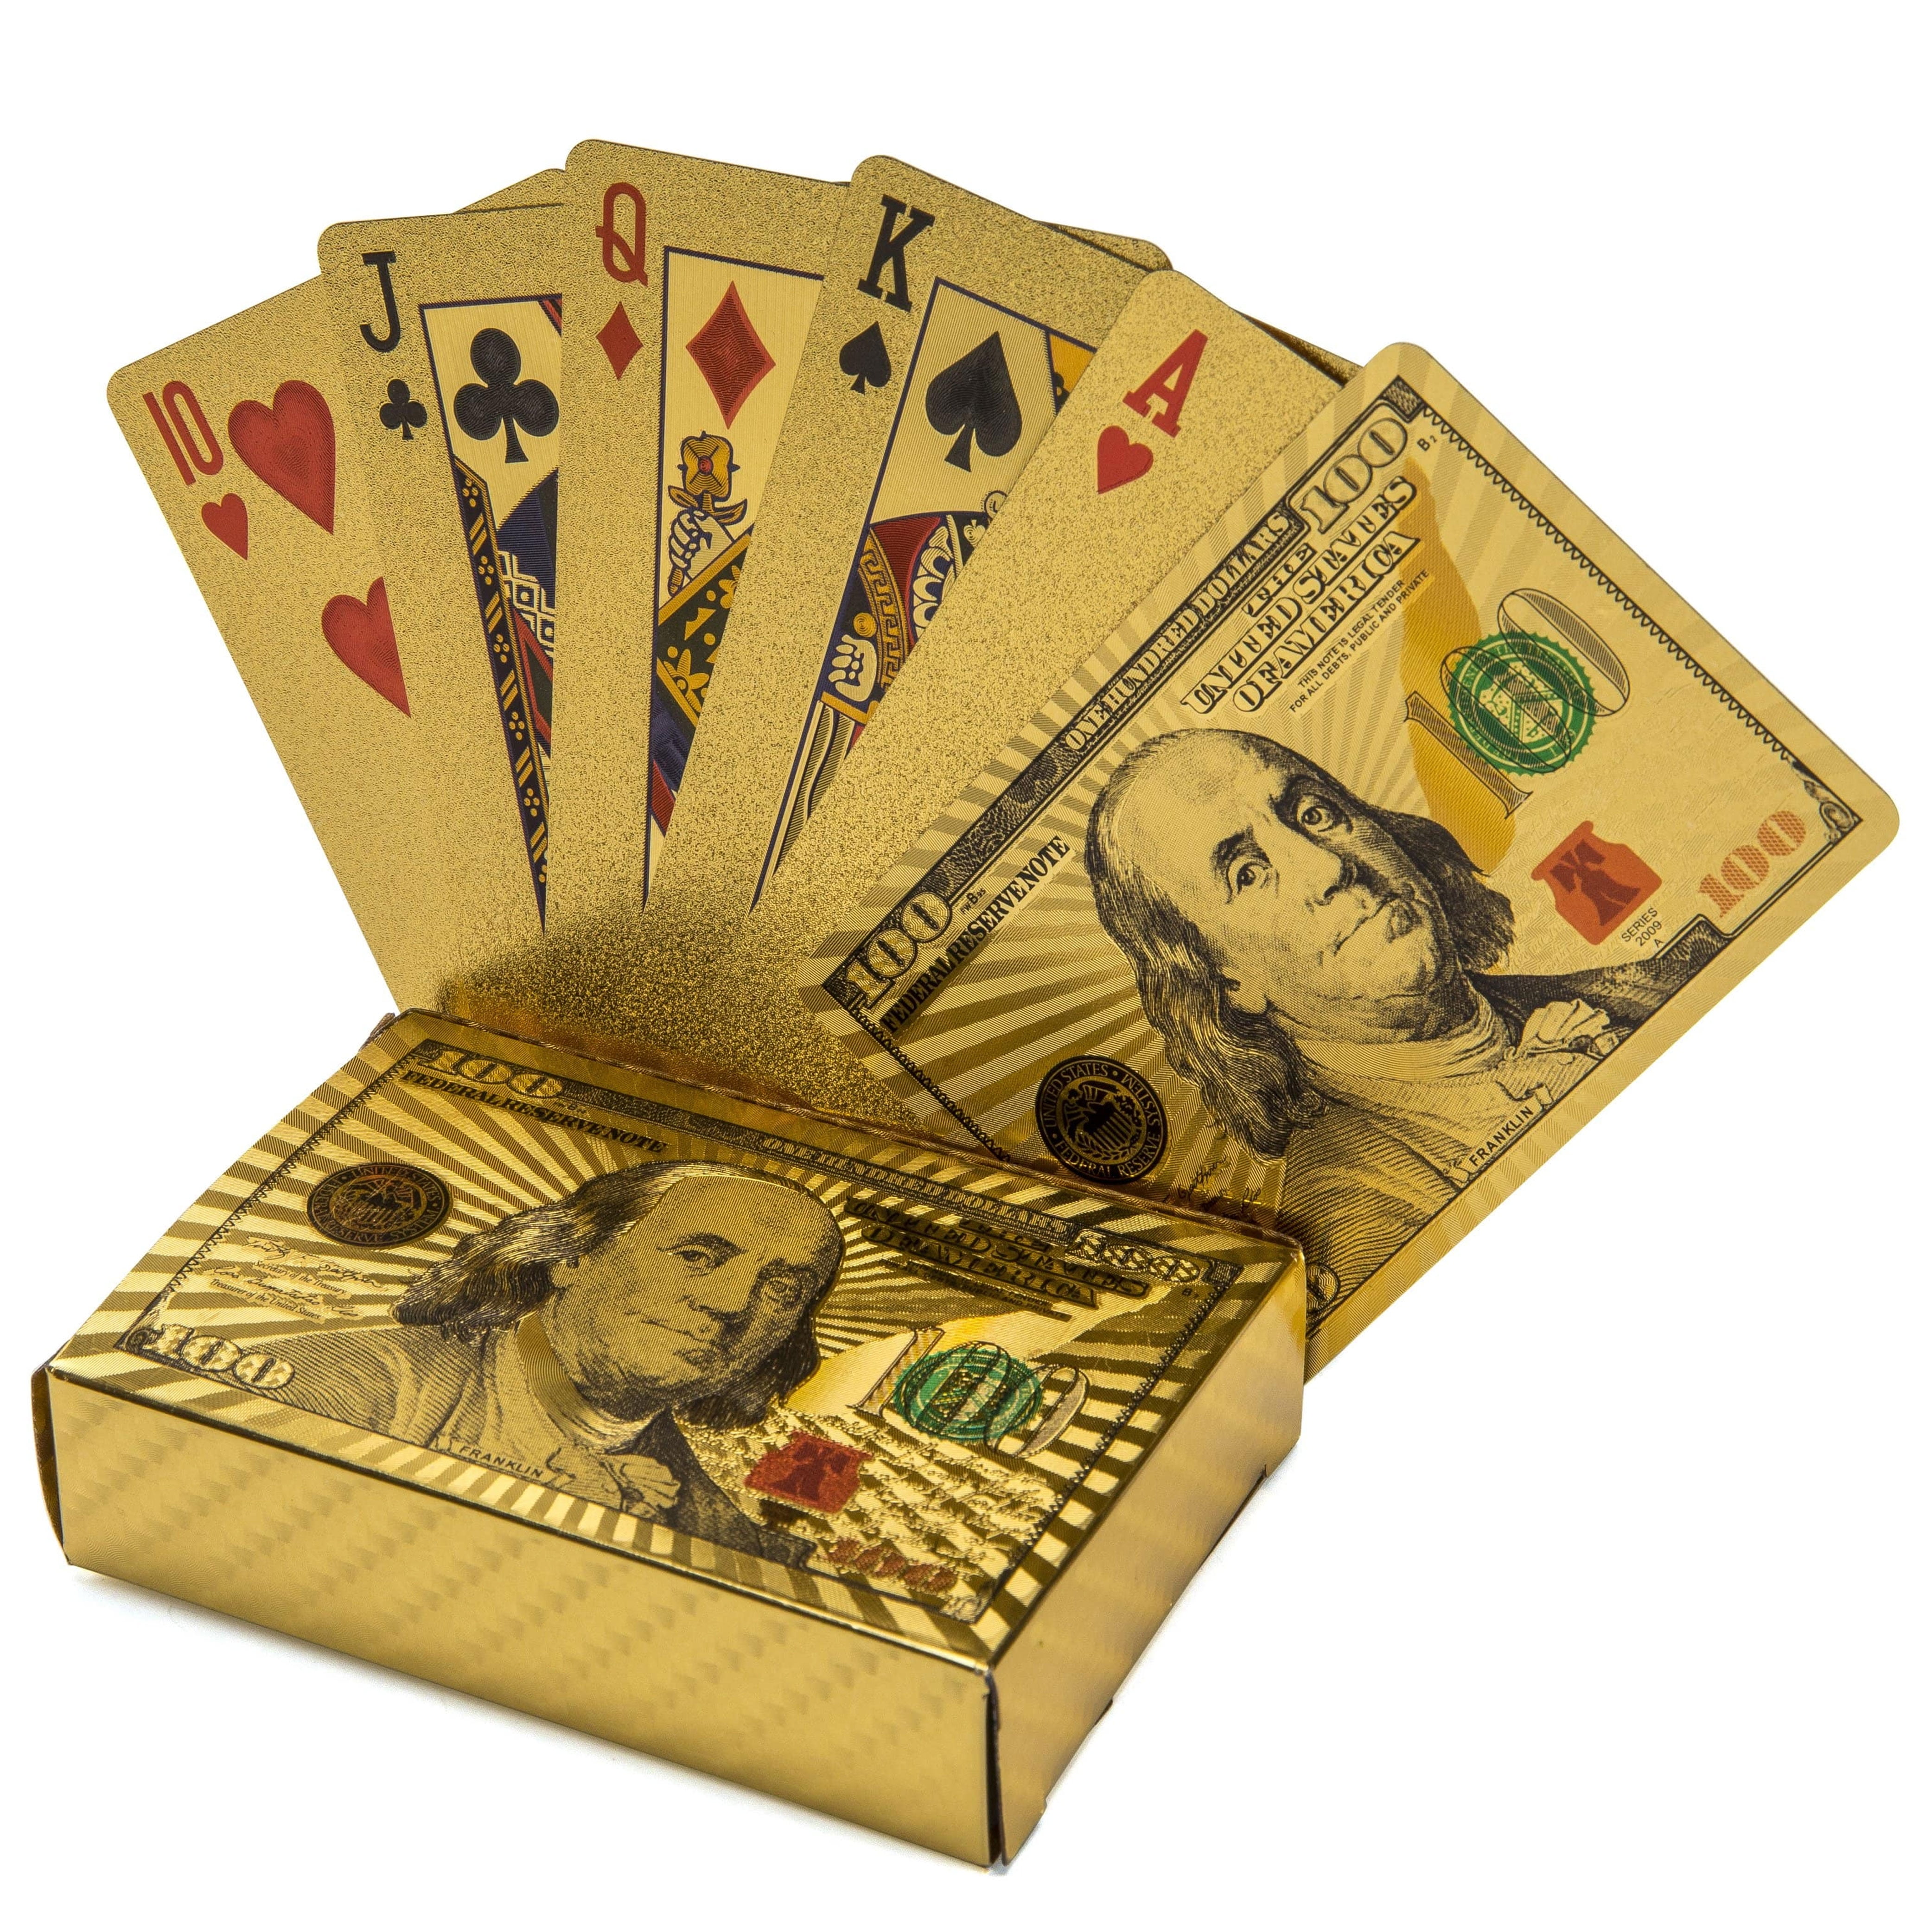 Details about   Plastic $100 Design Gold Playing Cards A deck of Cards Regular Poker Size